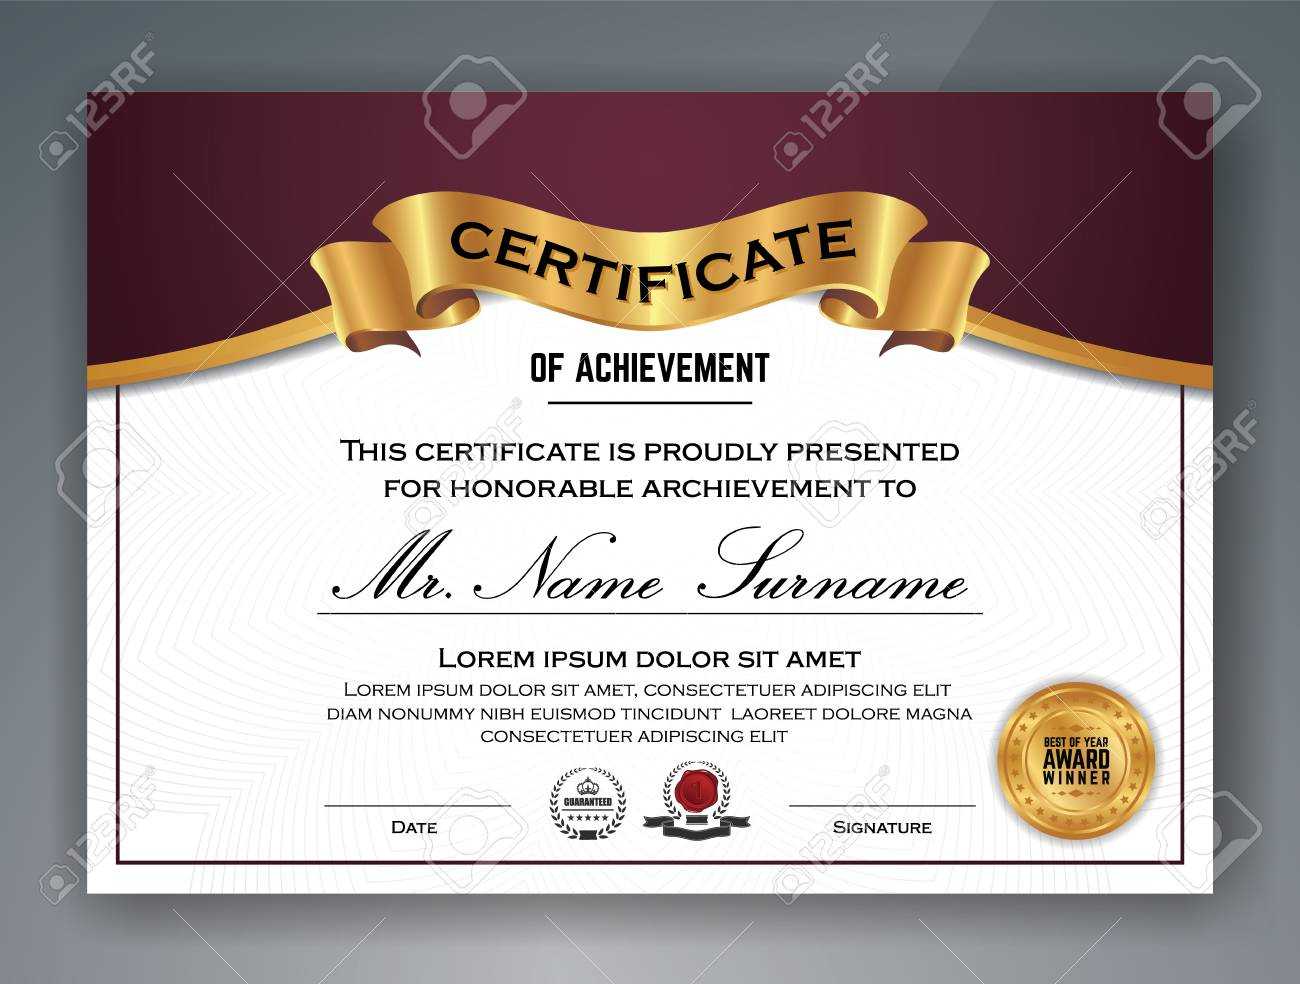 Multipurpose Professional Certificate Template Design For Print With Professional Award Certificate Template